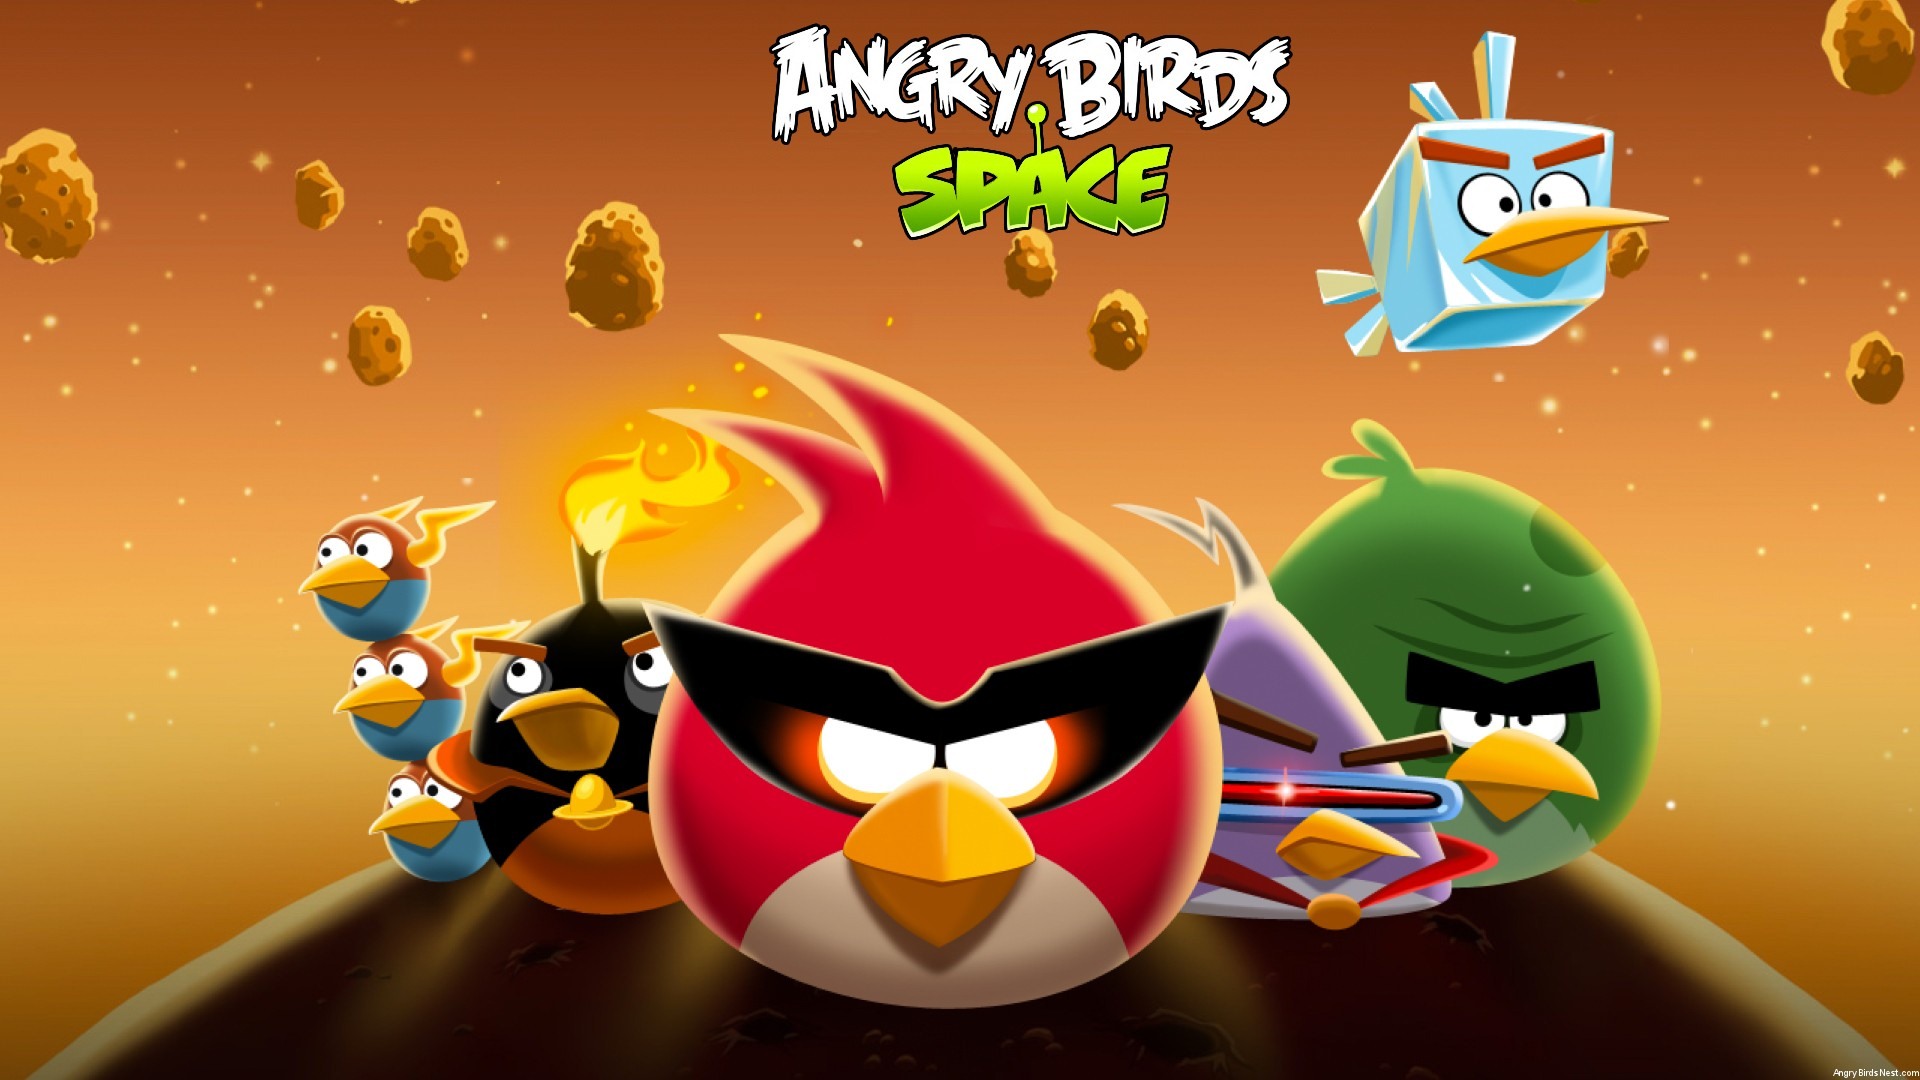 Angry Birds Game Wallpapers #20 - 1920x1080